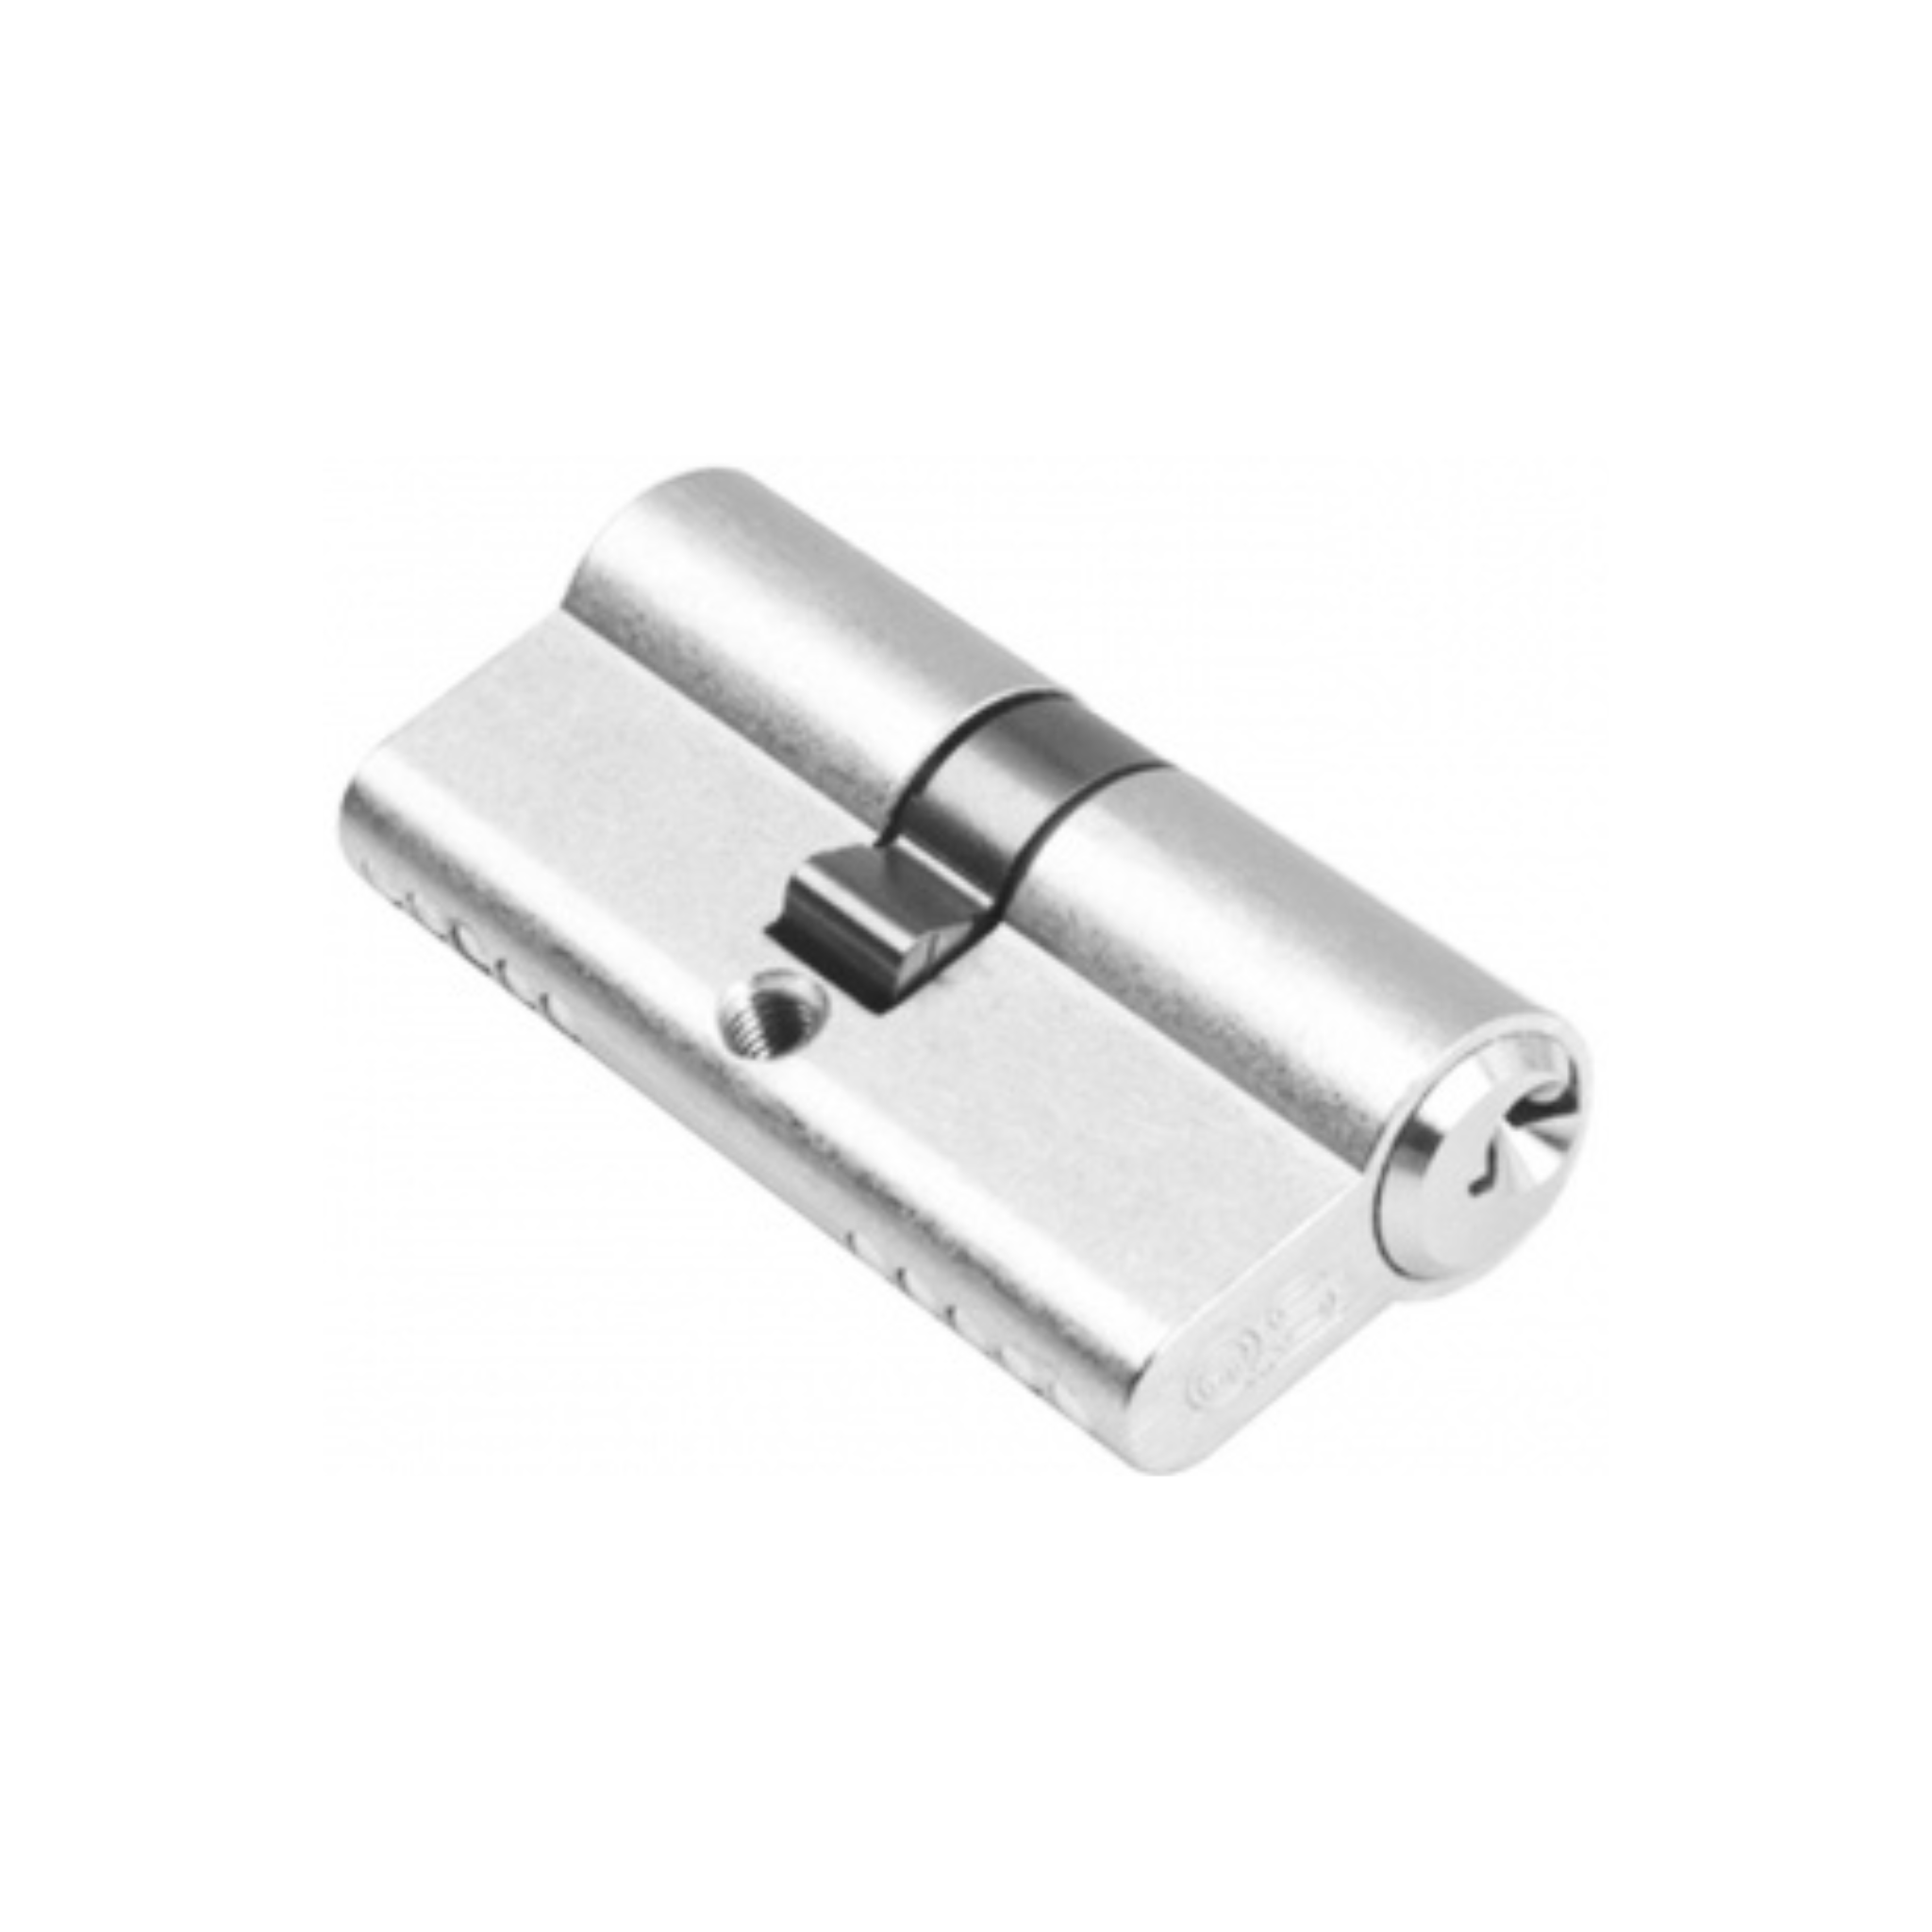 QS1103/AN, 60mm - 30/30, Double Cylinder, Key to Key, Keyed to Differ (Standard), 3 Keys, 5 Pin, Antique Nickel, QS